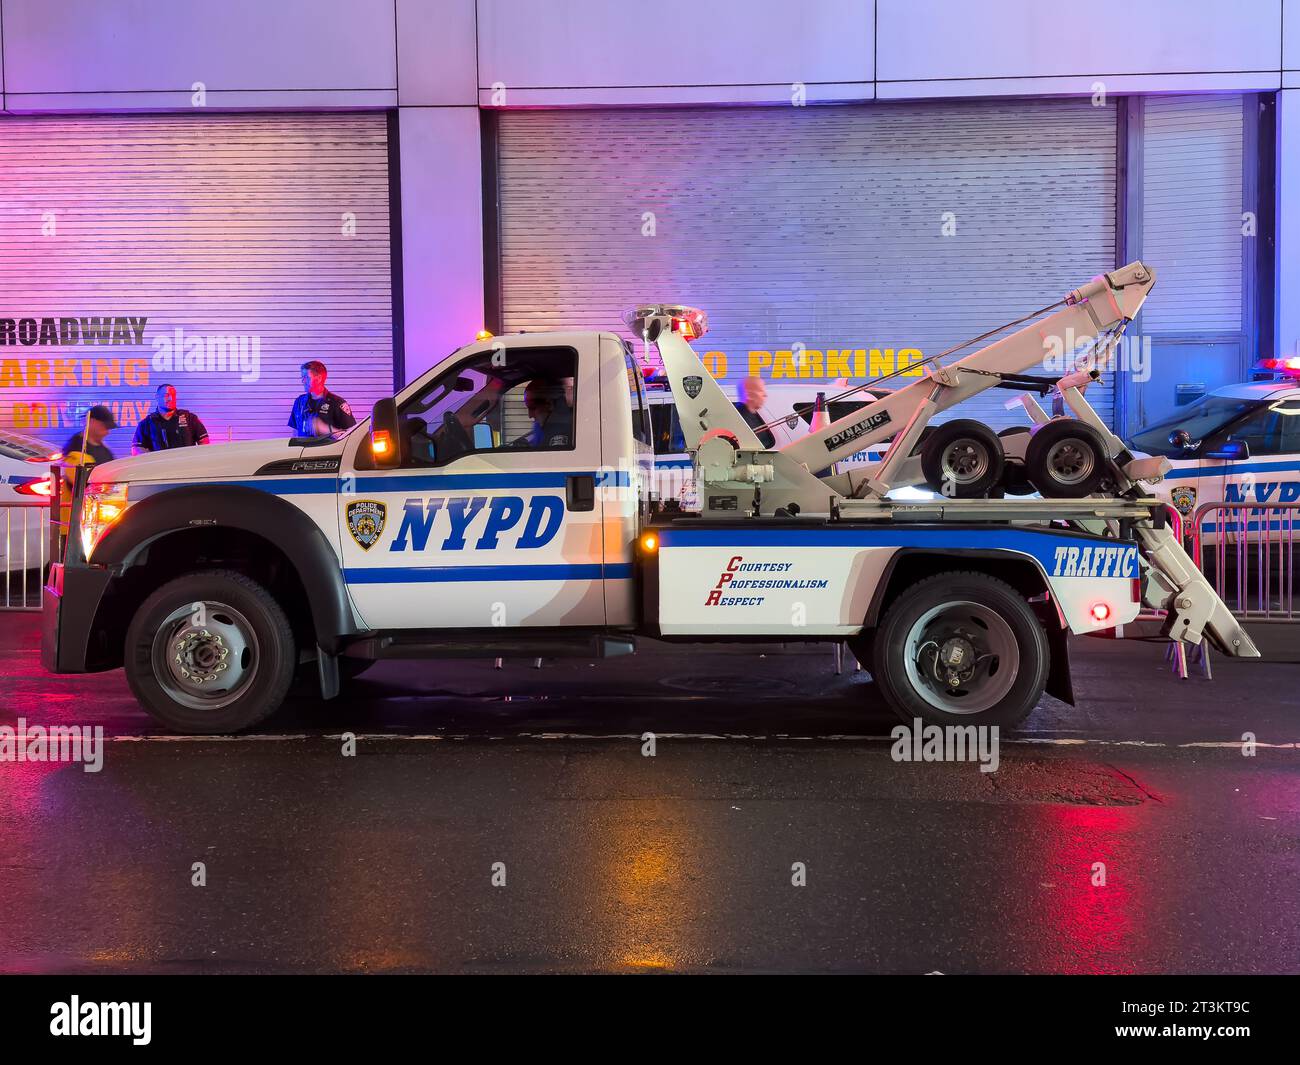 New York, États-Unis. City of New York police Department (NYPD) Ford Tow Truck - Traffic Enforcement à Manhattan, New York. Banque D'Images